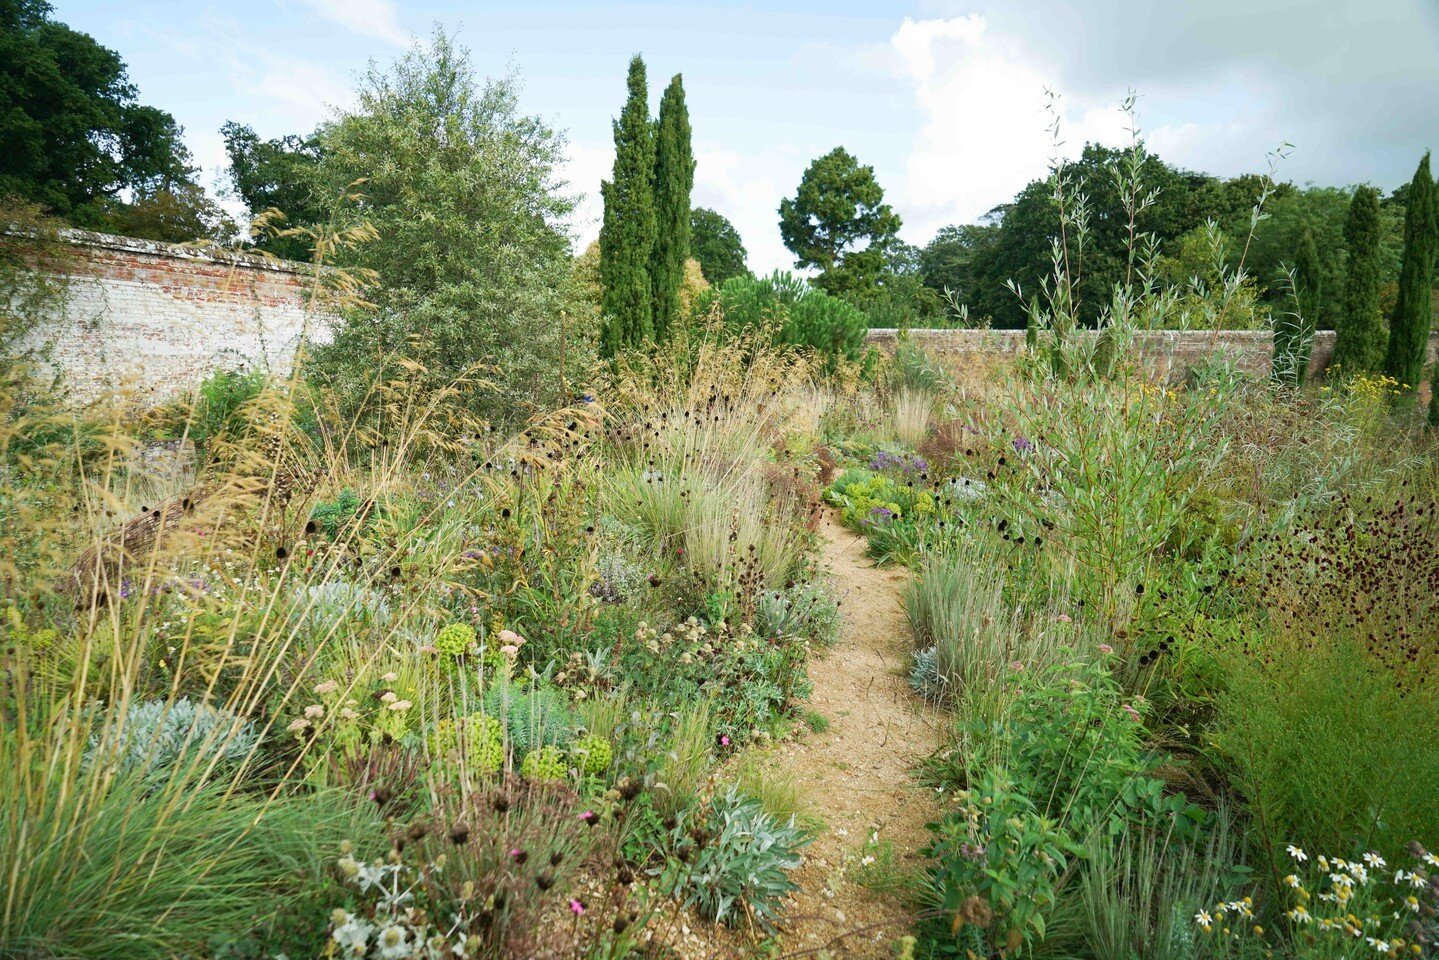 Studio visit to Knepp's walled garden last week, research for our project on the Kent coast. 

The fantastic rewilded garden importantly challenges the conventional gardening mindset, creating a garden which primarily provides for wildlife to help re